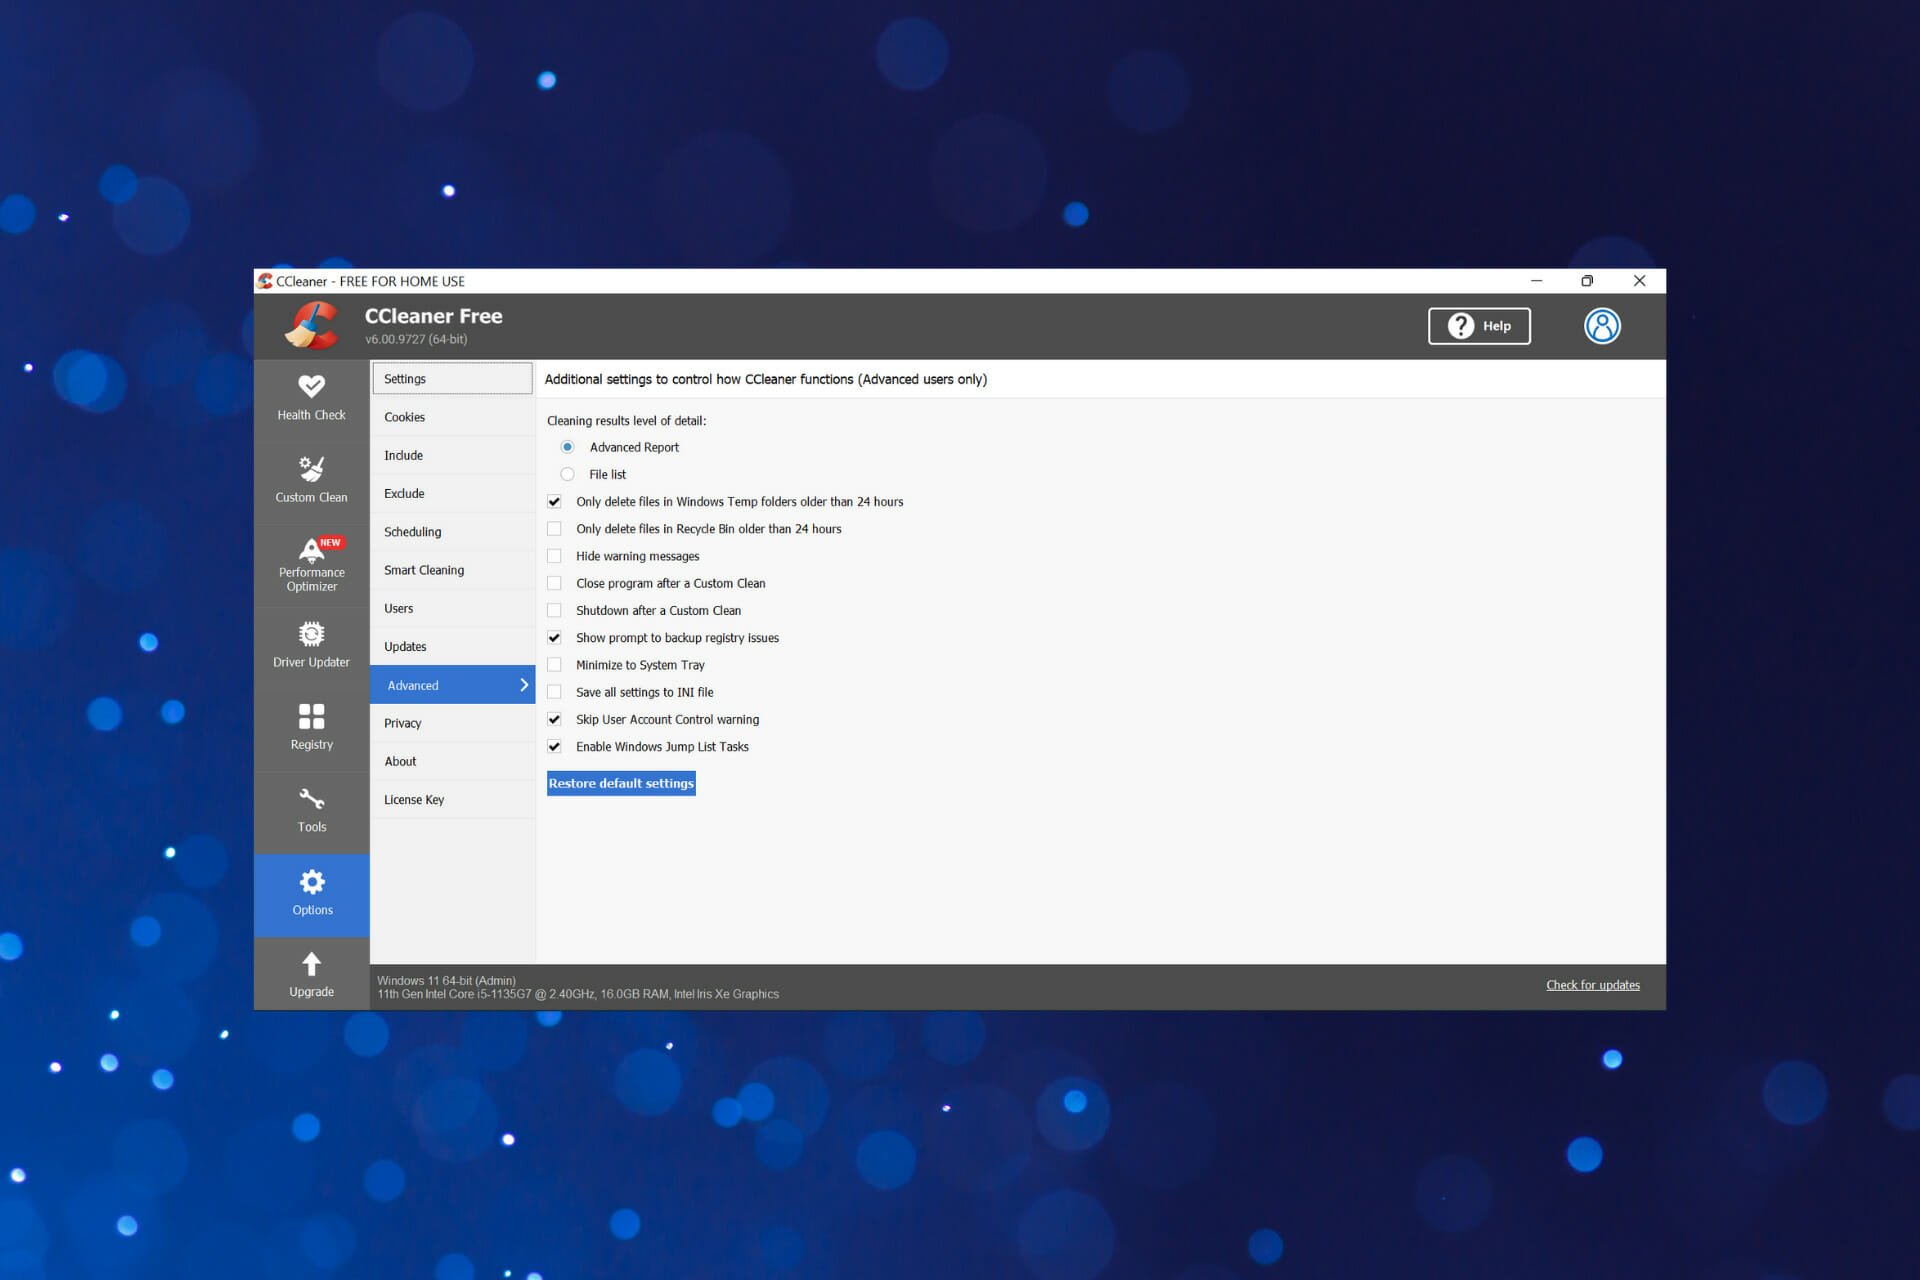 Find out about CCleaner advanced option